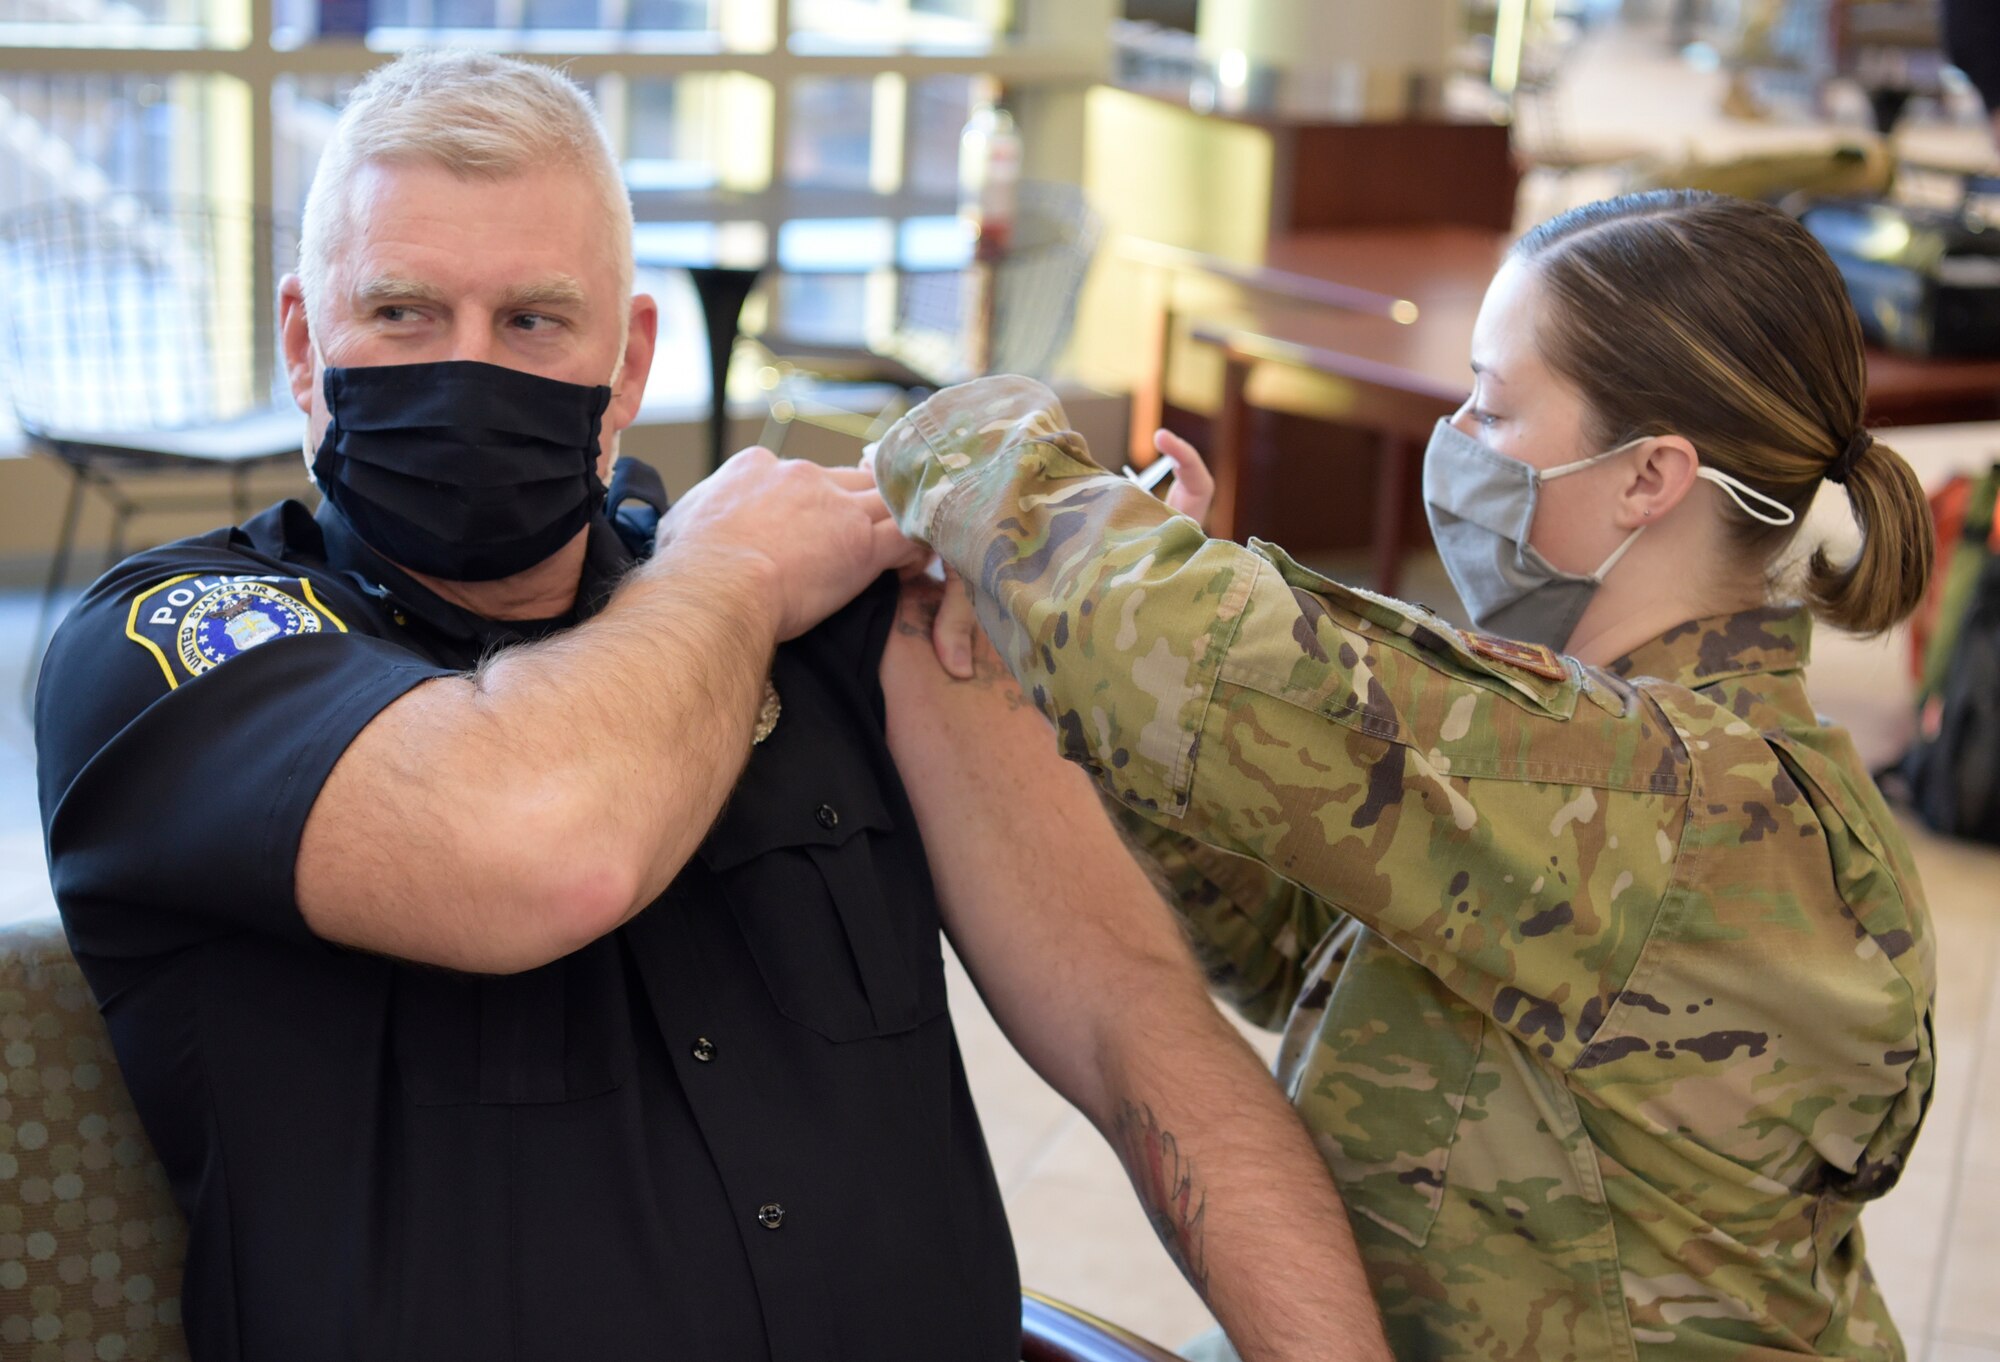 Man gets vaccination from a woman in military uniform